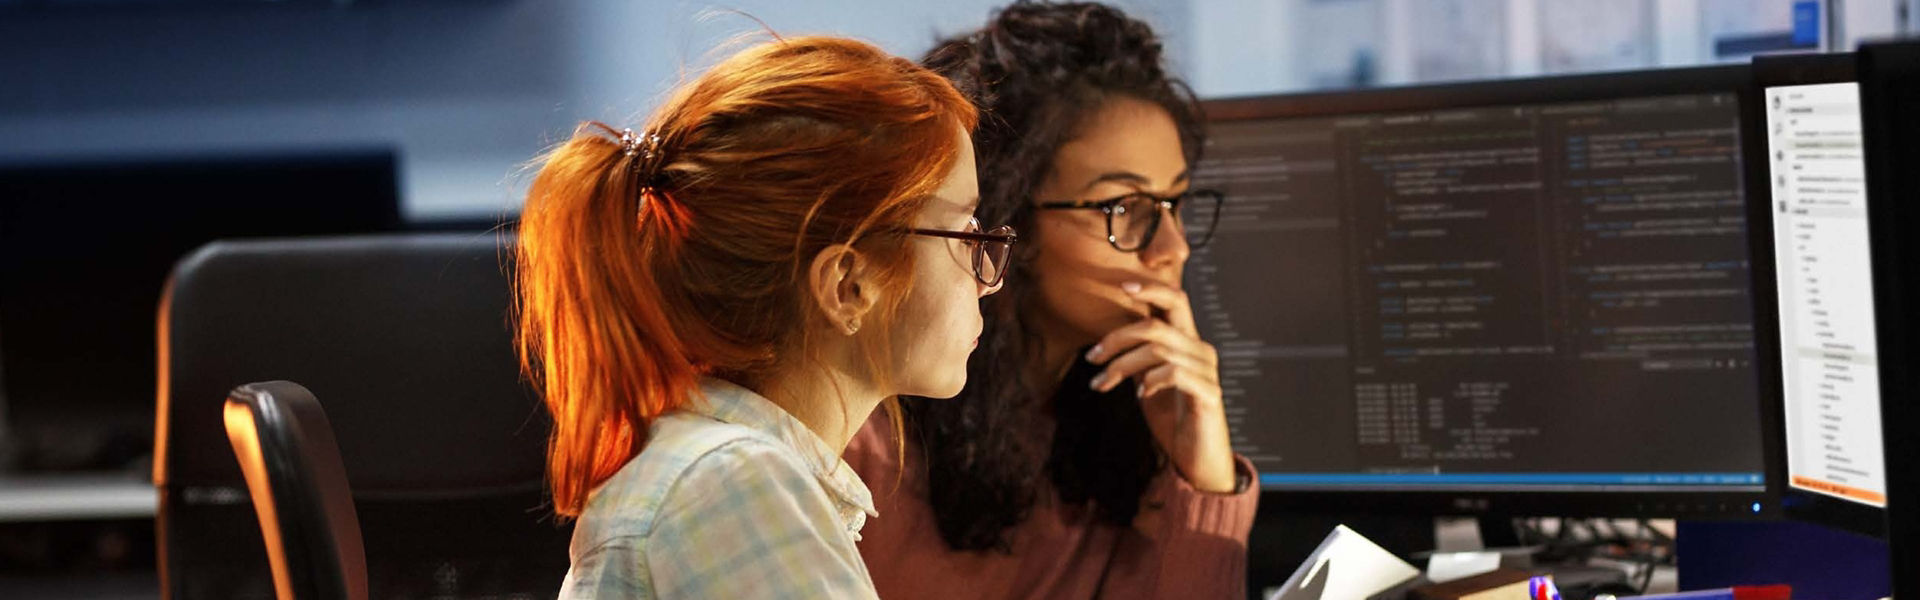 Two women, one with red hair one with dark hair, working at computers together with serious faces 